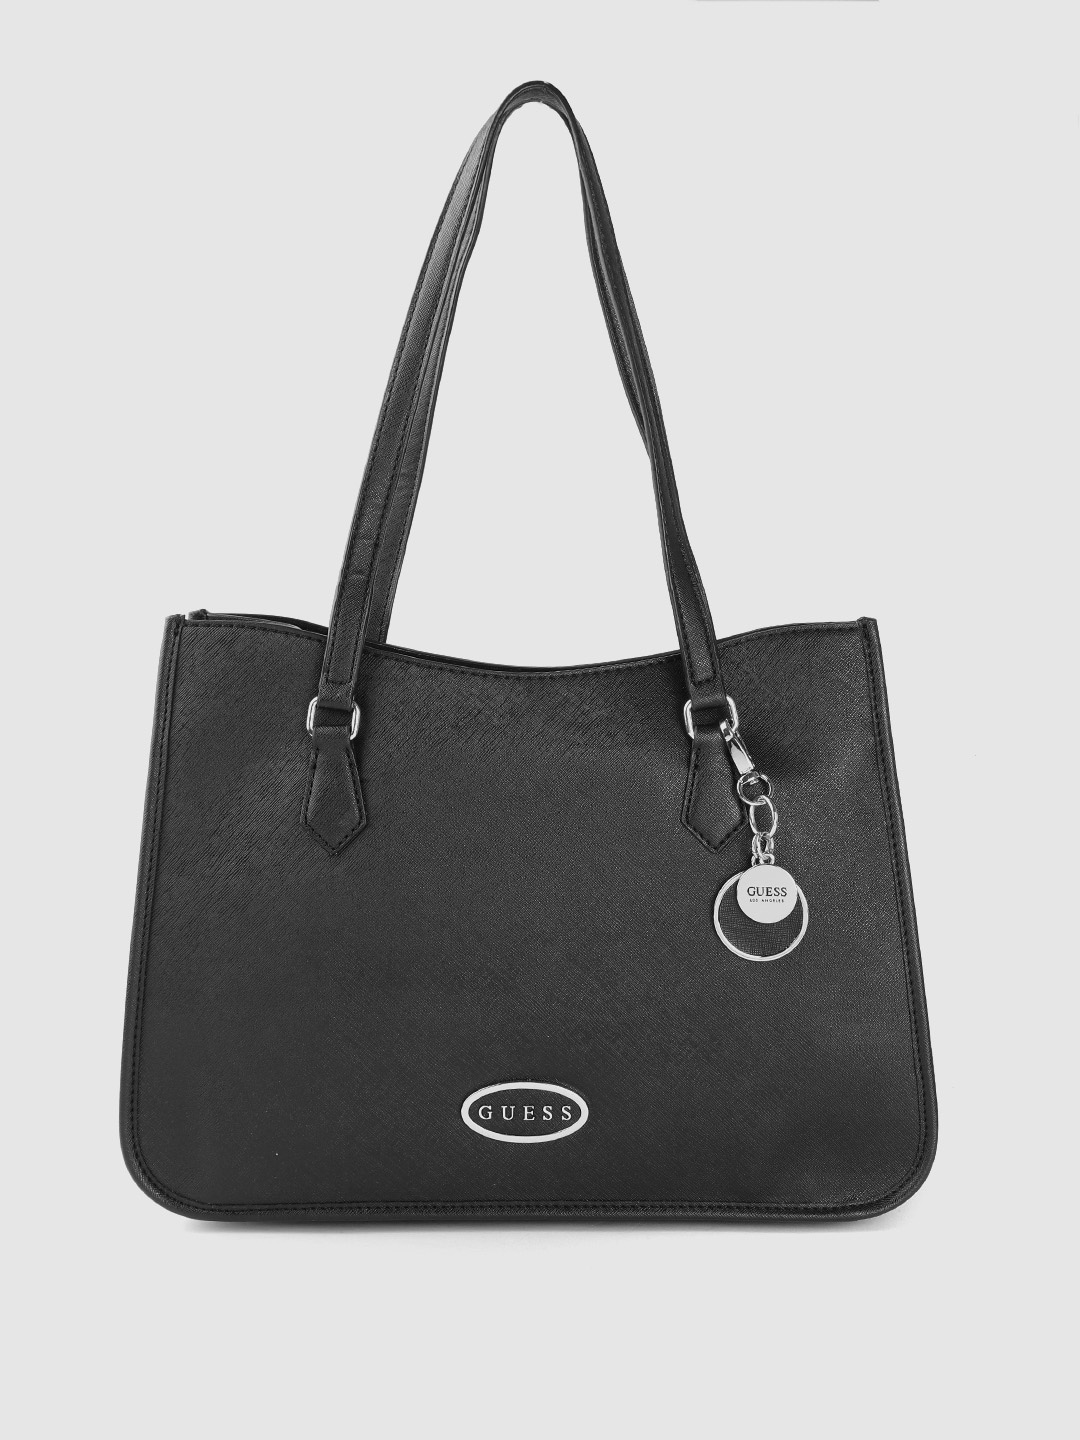 GUESS Women Black Solid Structured Shoulder Bag Price in India